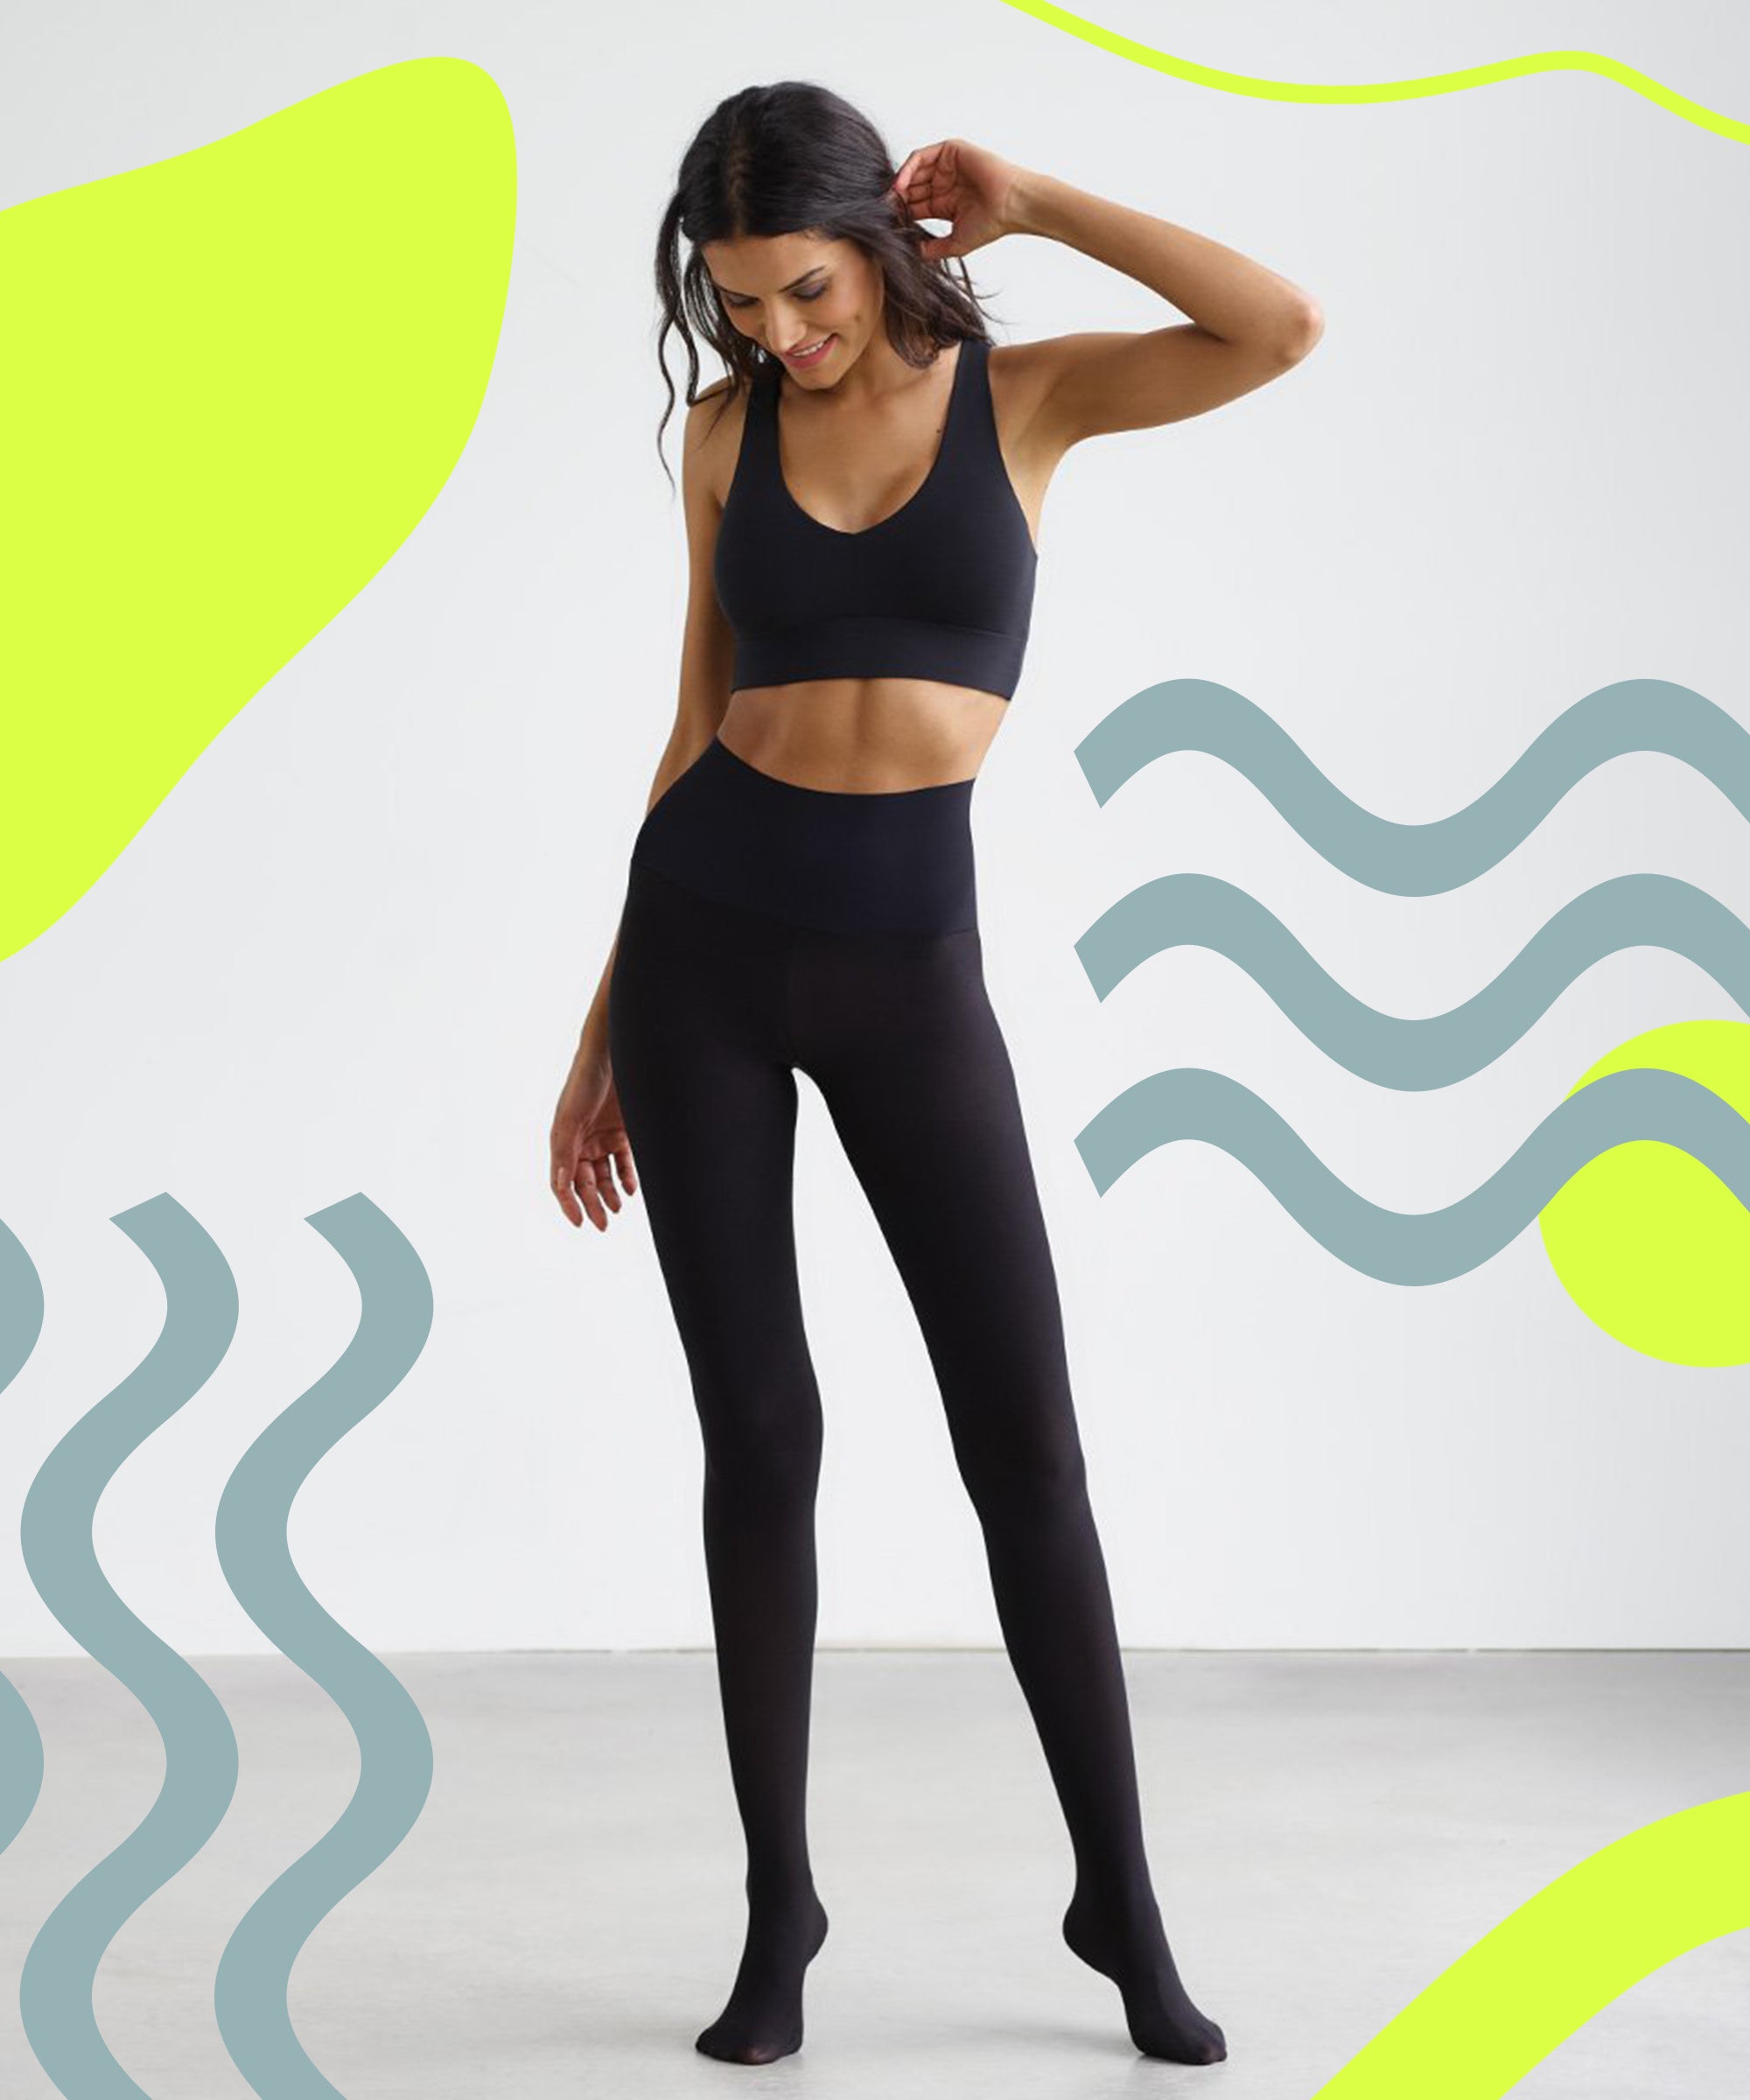 No Nonsense Leggings Better than Ever! - With Our Best - Denver